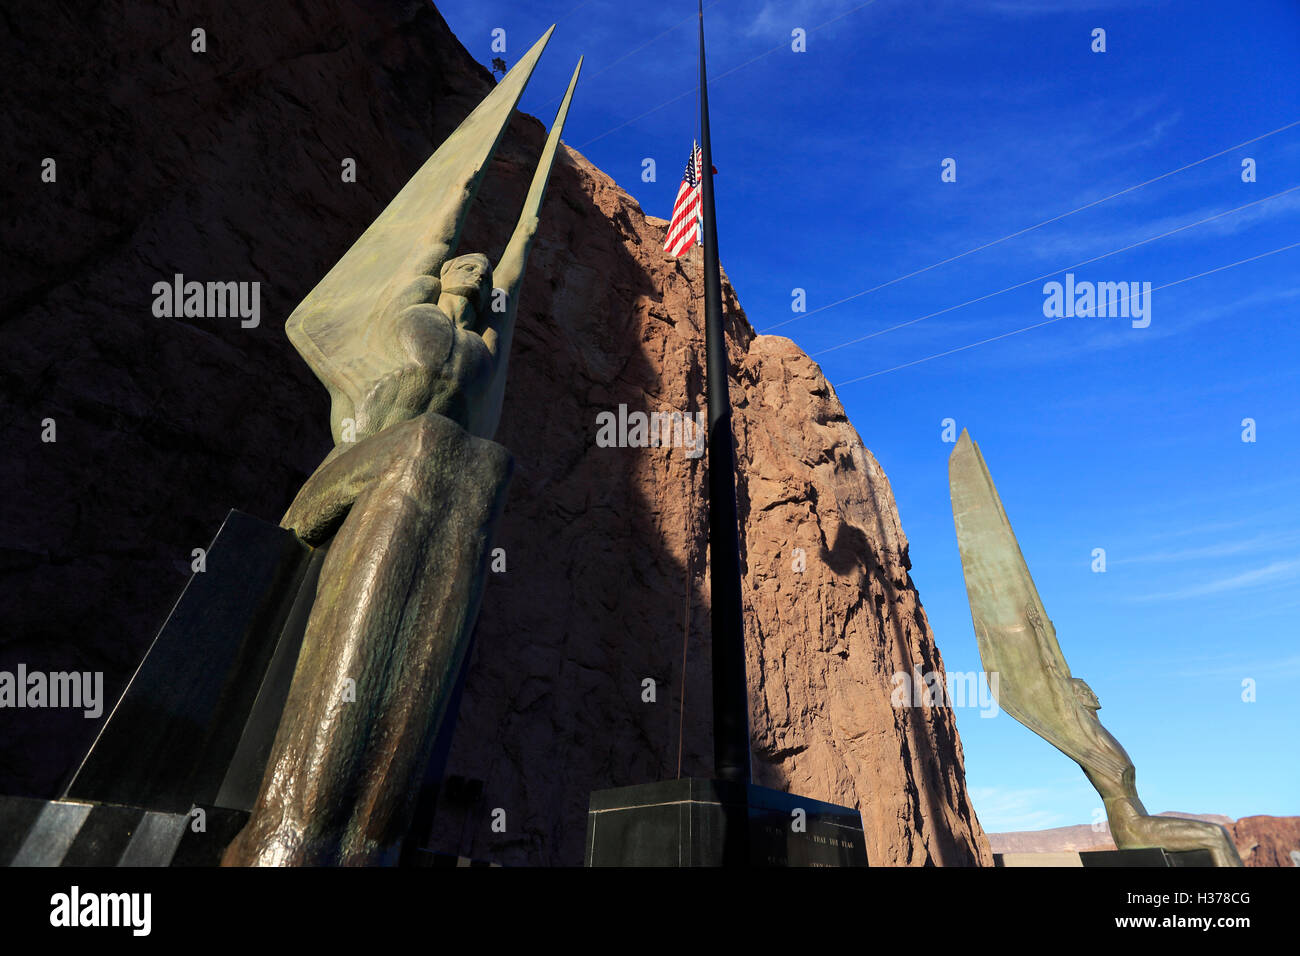 Bronze statue of 'Winged Figures of the Republic' by sculptor Oskar Hansen at Hoover Dam.Boulder.Nevada.USA Stock Photo